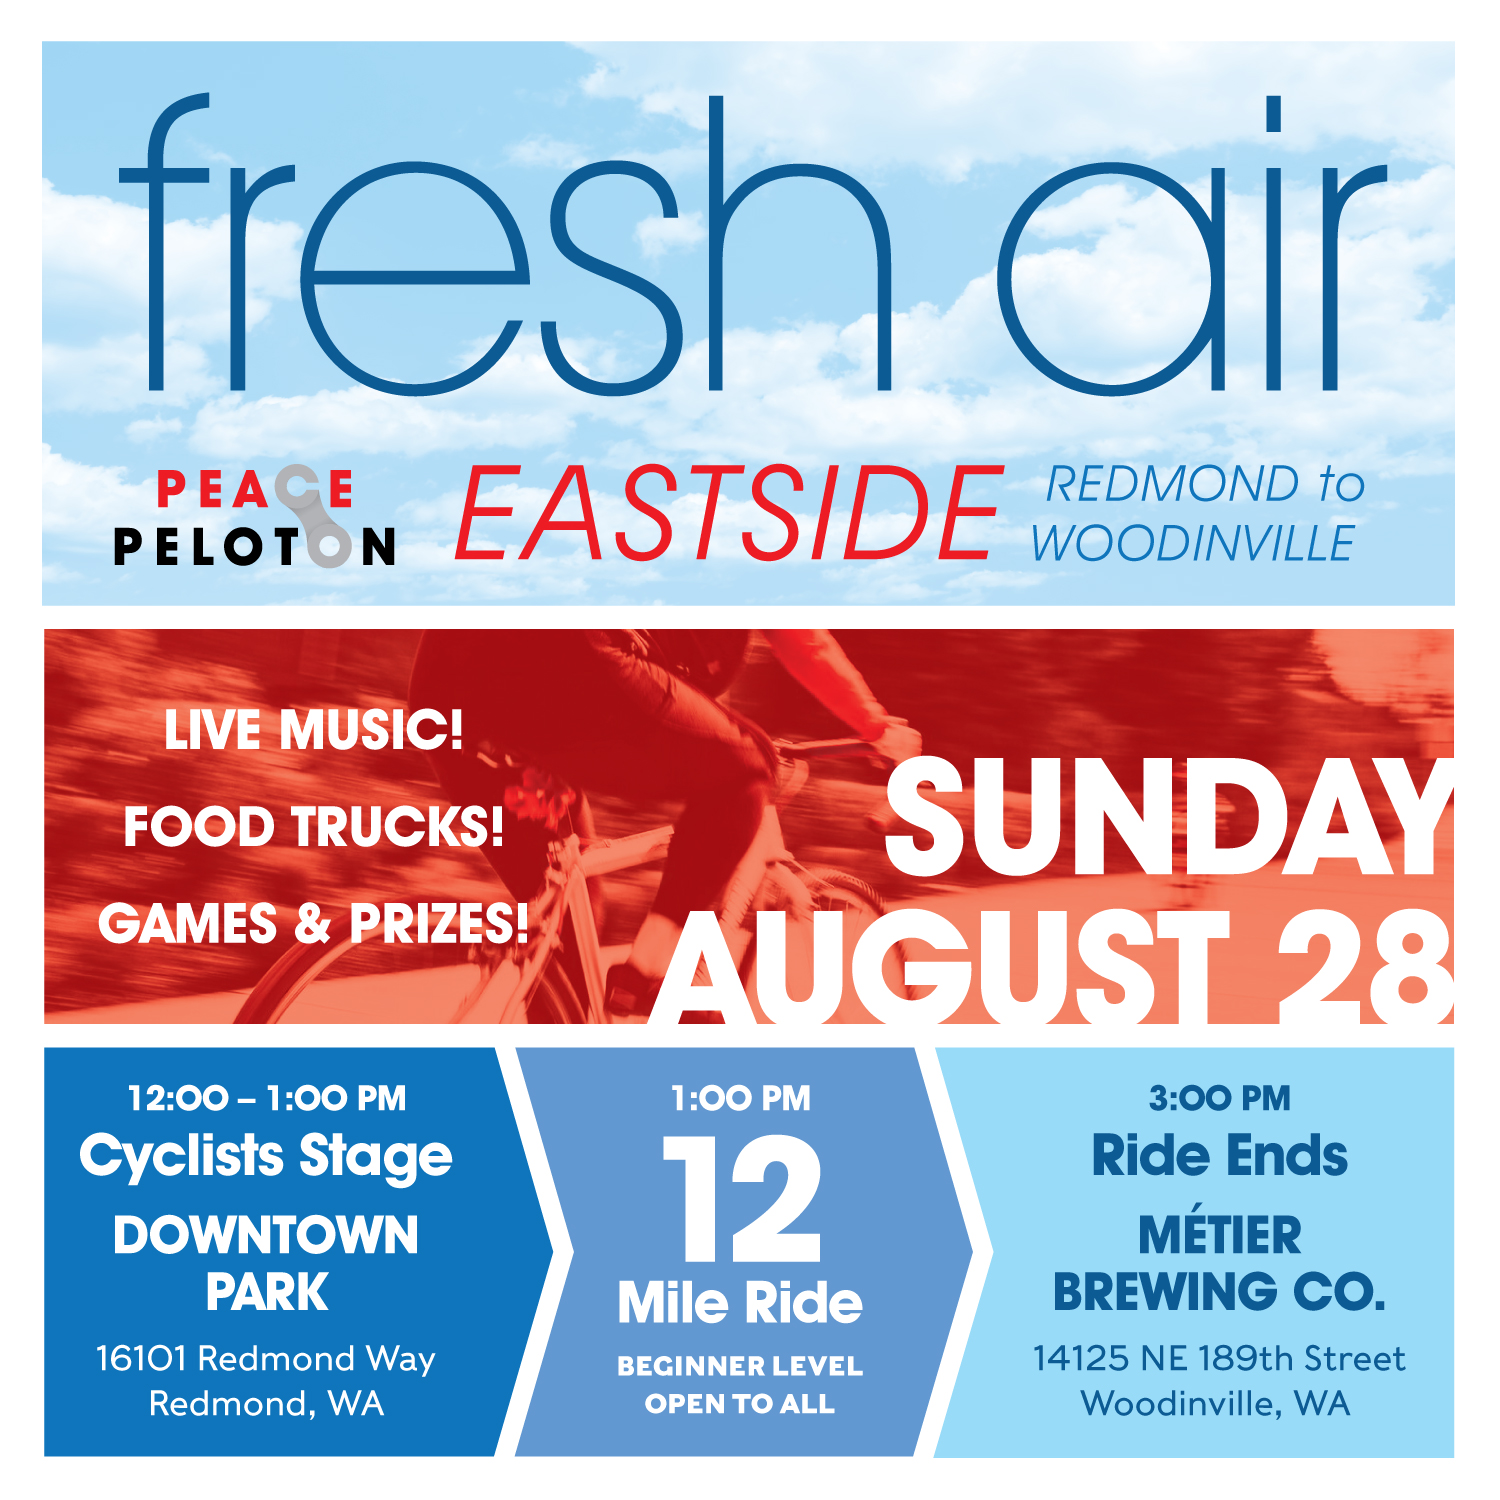 Graphic in Blue and Red that reads: Fresh Air Eastside Sunday August 28th cyclists stage downtown Redmond park 12 - 1 PM Ride 12 Miles to Meiter Brewing Co in Woodinville